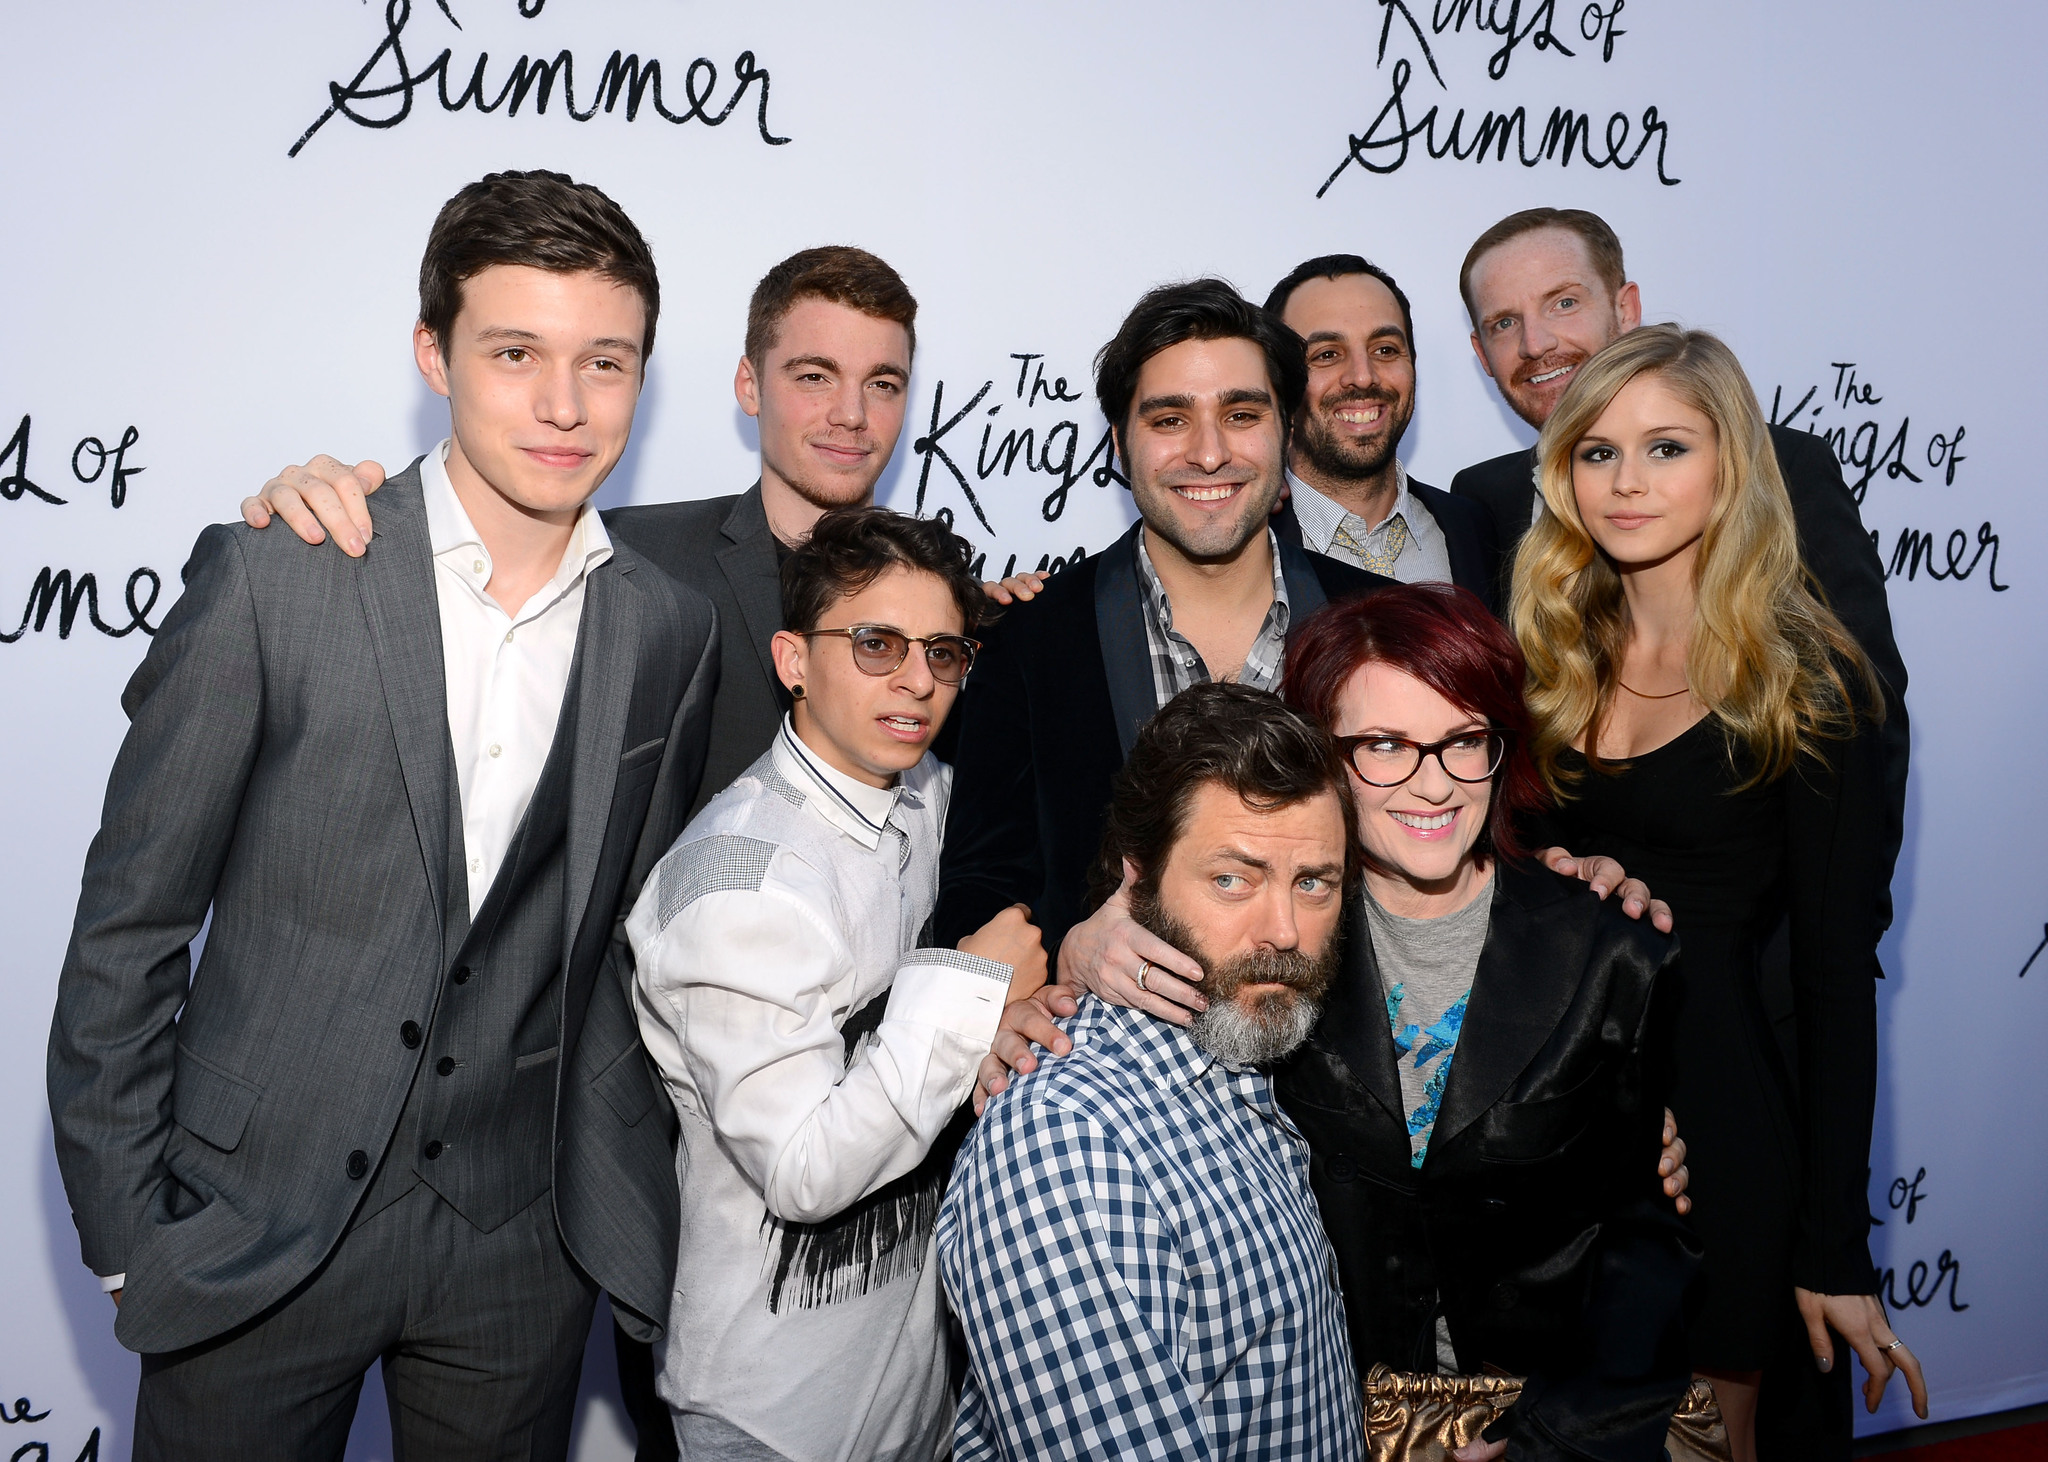 Megan Mullally, Nick Offerman, Moises Arias, Marc Evan, Gabriel Basso, Nick Robinson, Jordan Vogt-Roberts, Chris Galletta, Erin Moriarty and Evan Jackson at event of The Kings of Summer (2013)